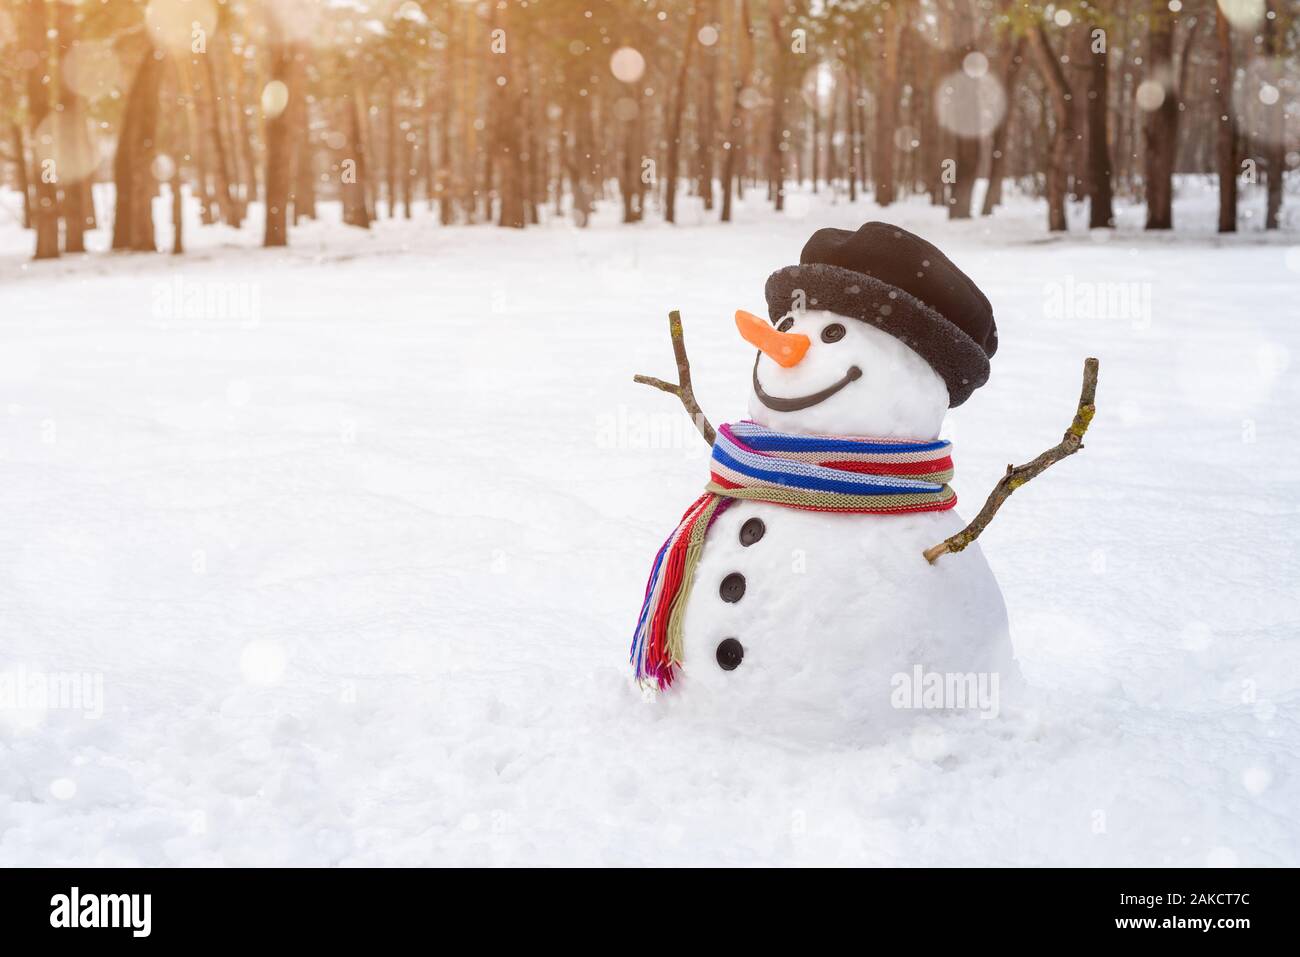 Cheerful snowman in a snowy city park. Christmas scene with traditional winter fun for children. Copy space for text Stock Photo